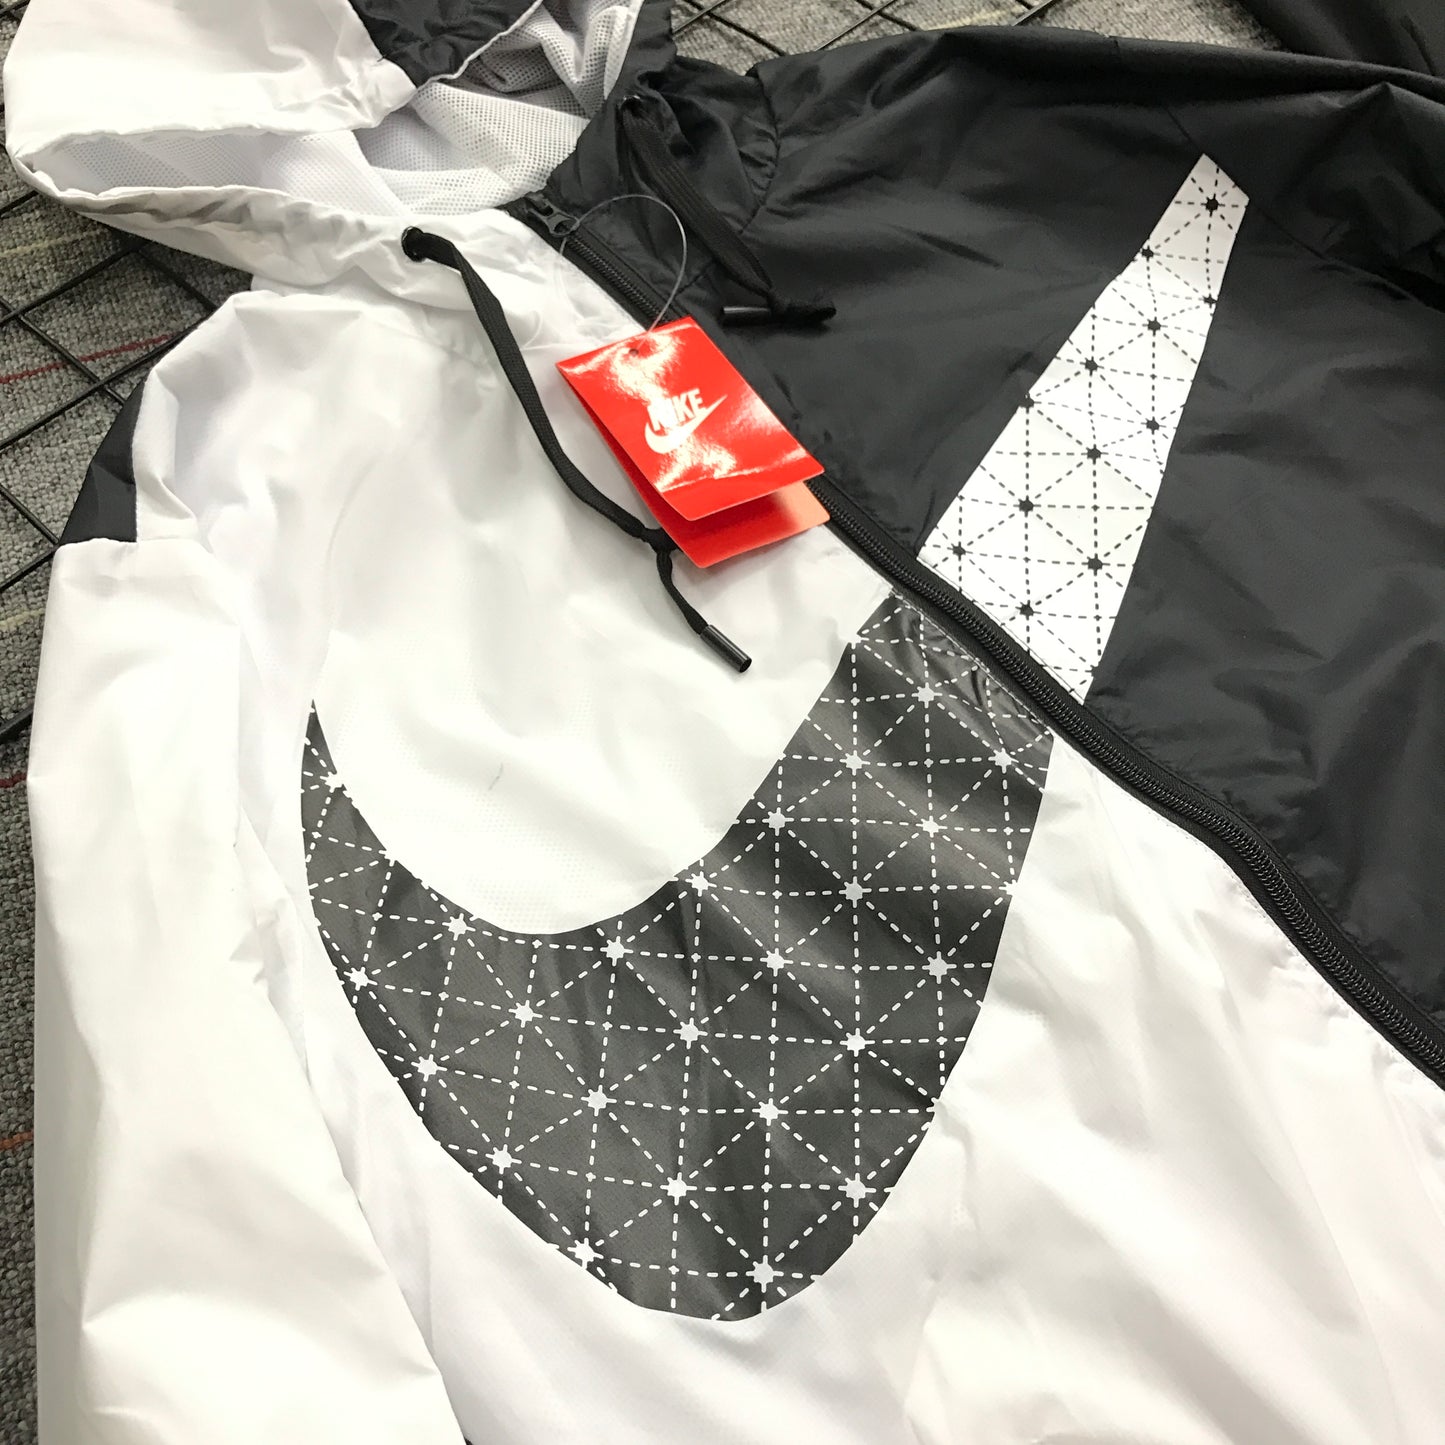 N Just Do It Jacket + Tracksuit Pants - whatever on 